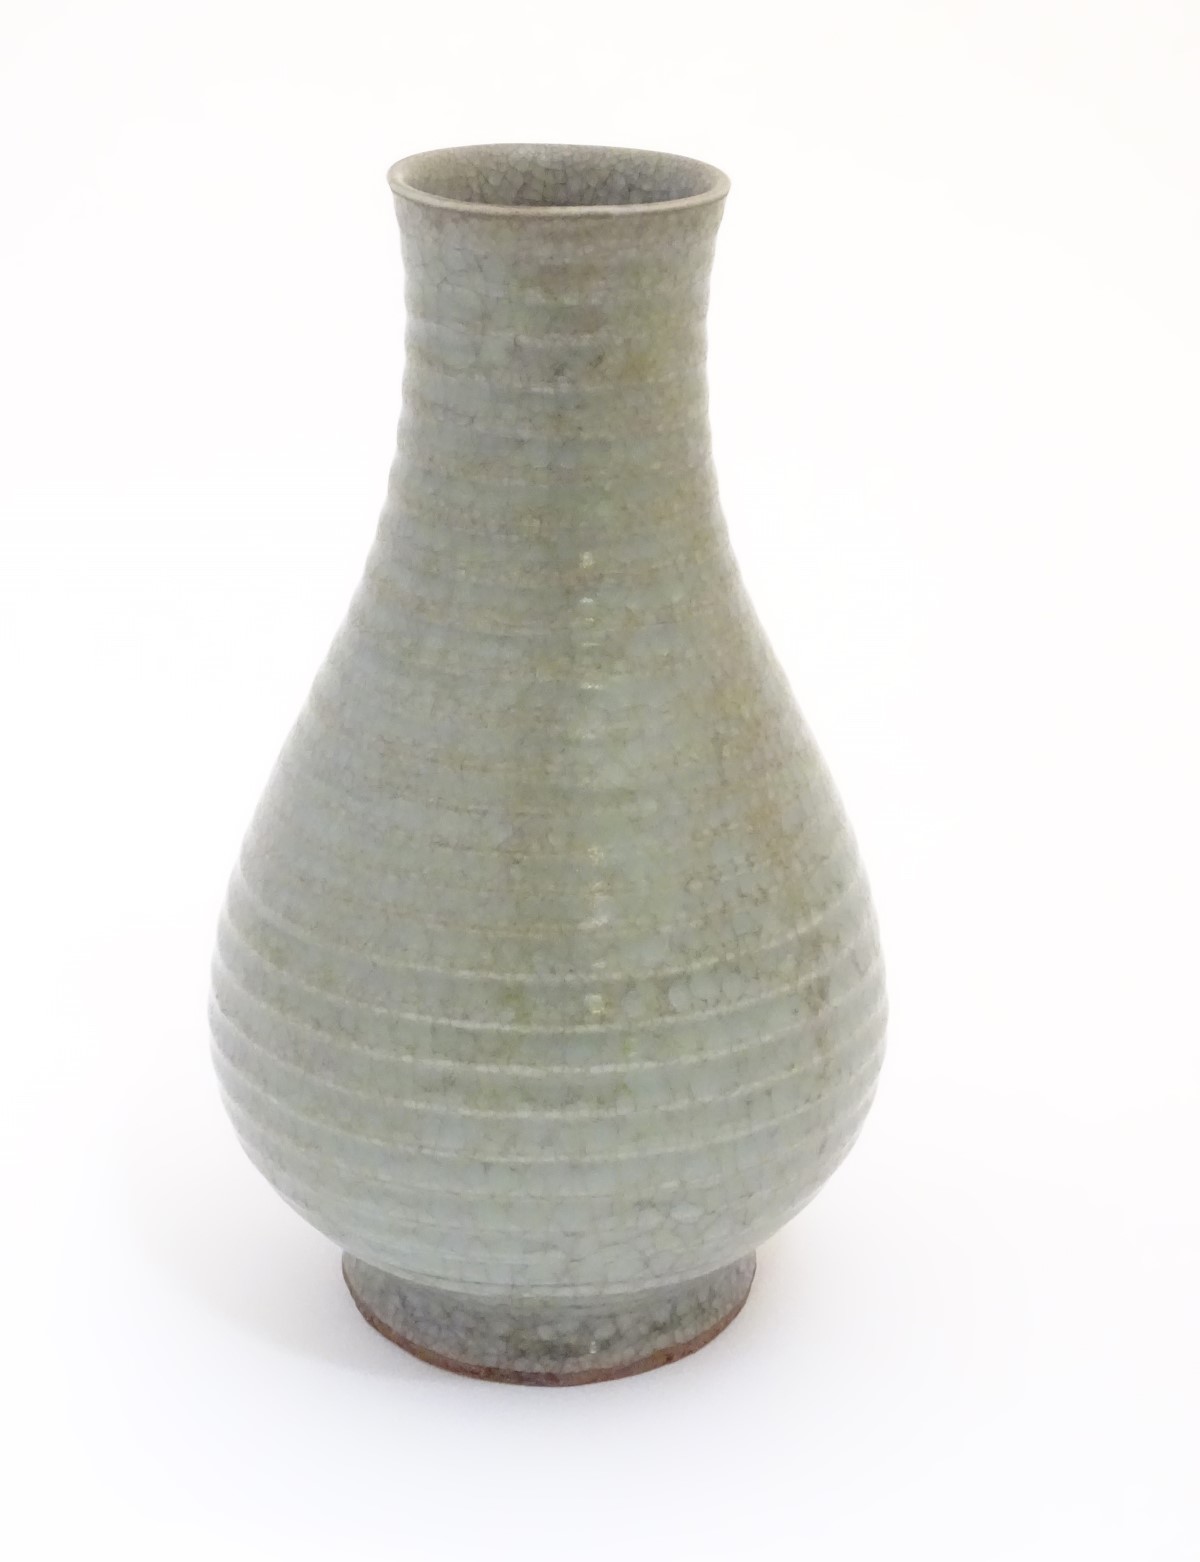 A Chinese celadon pear-shaped vase with a crackle glaze. Approx. 9 3/4" high. - Image 8 of 8